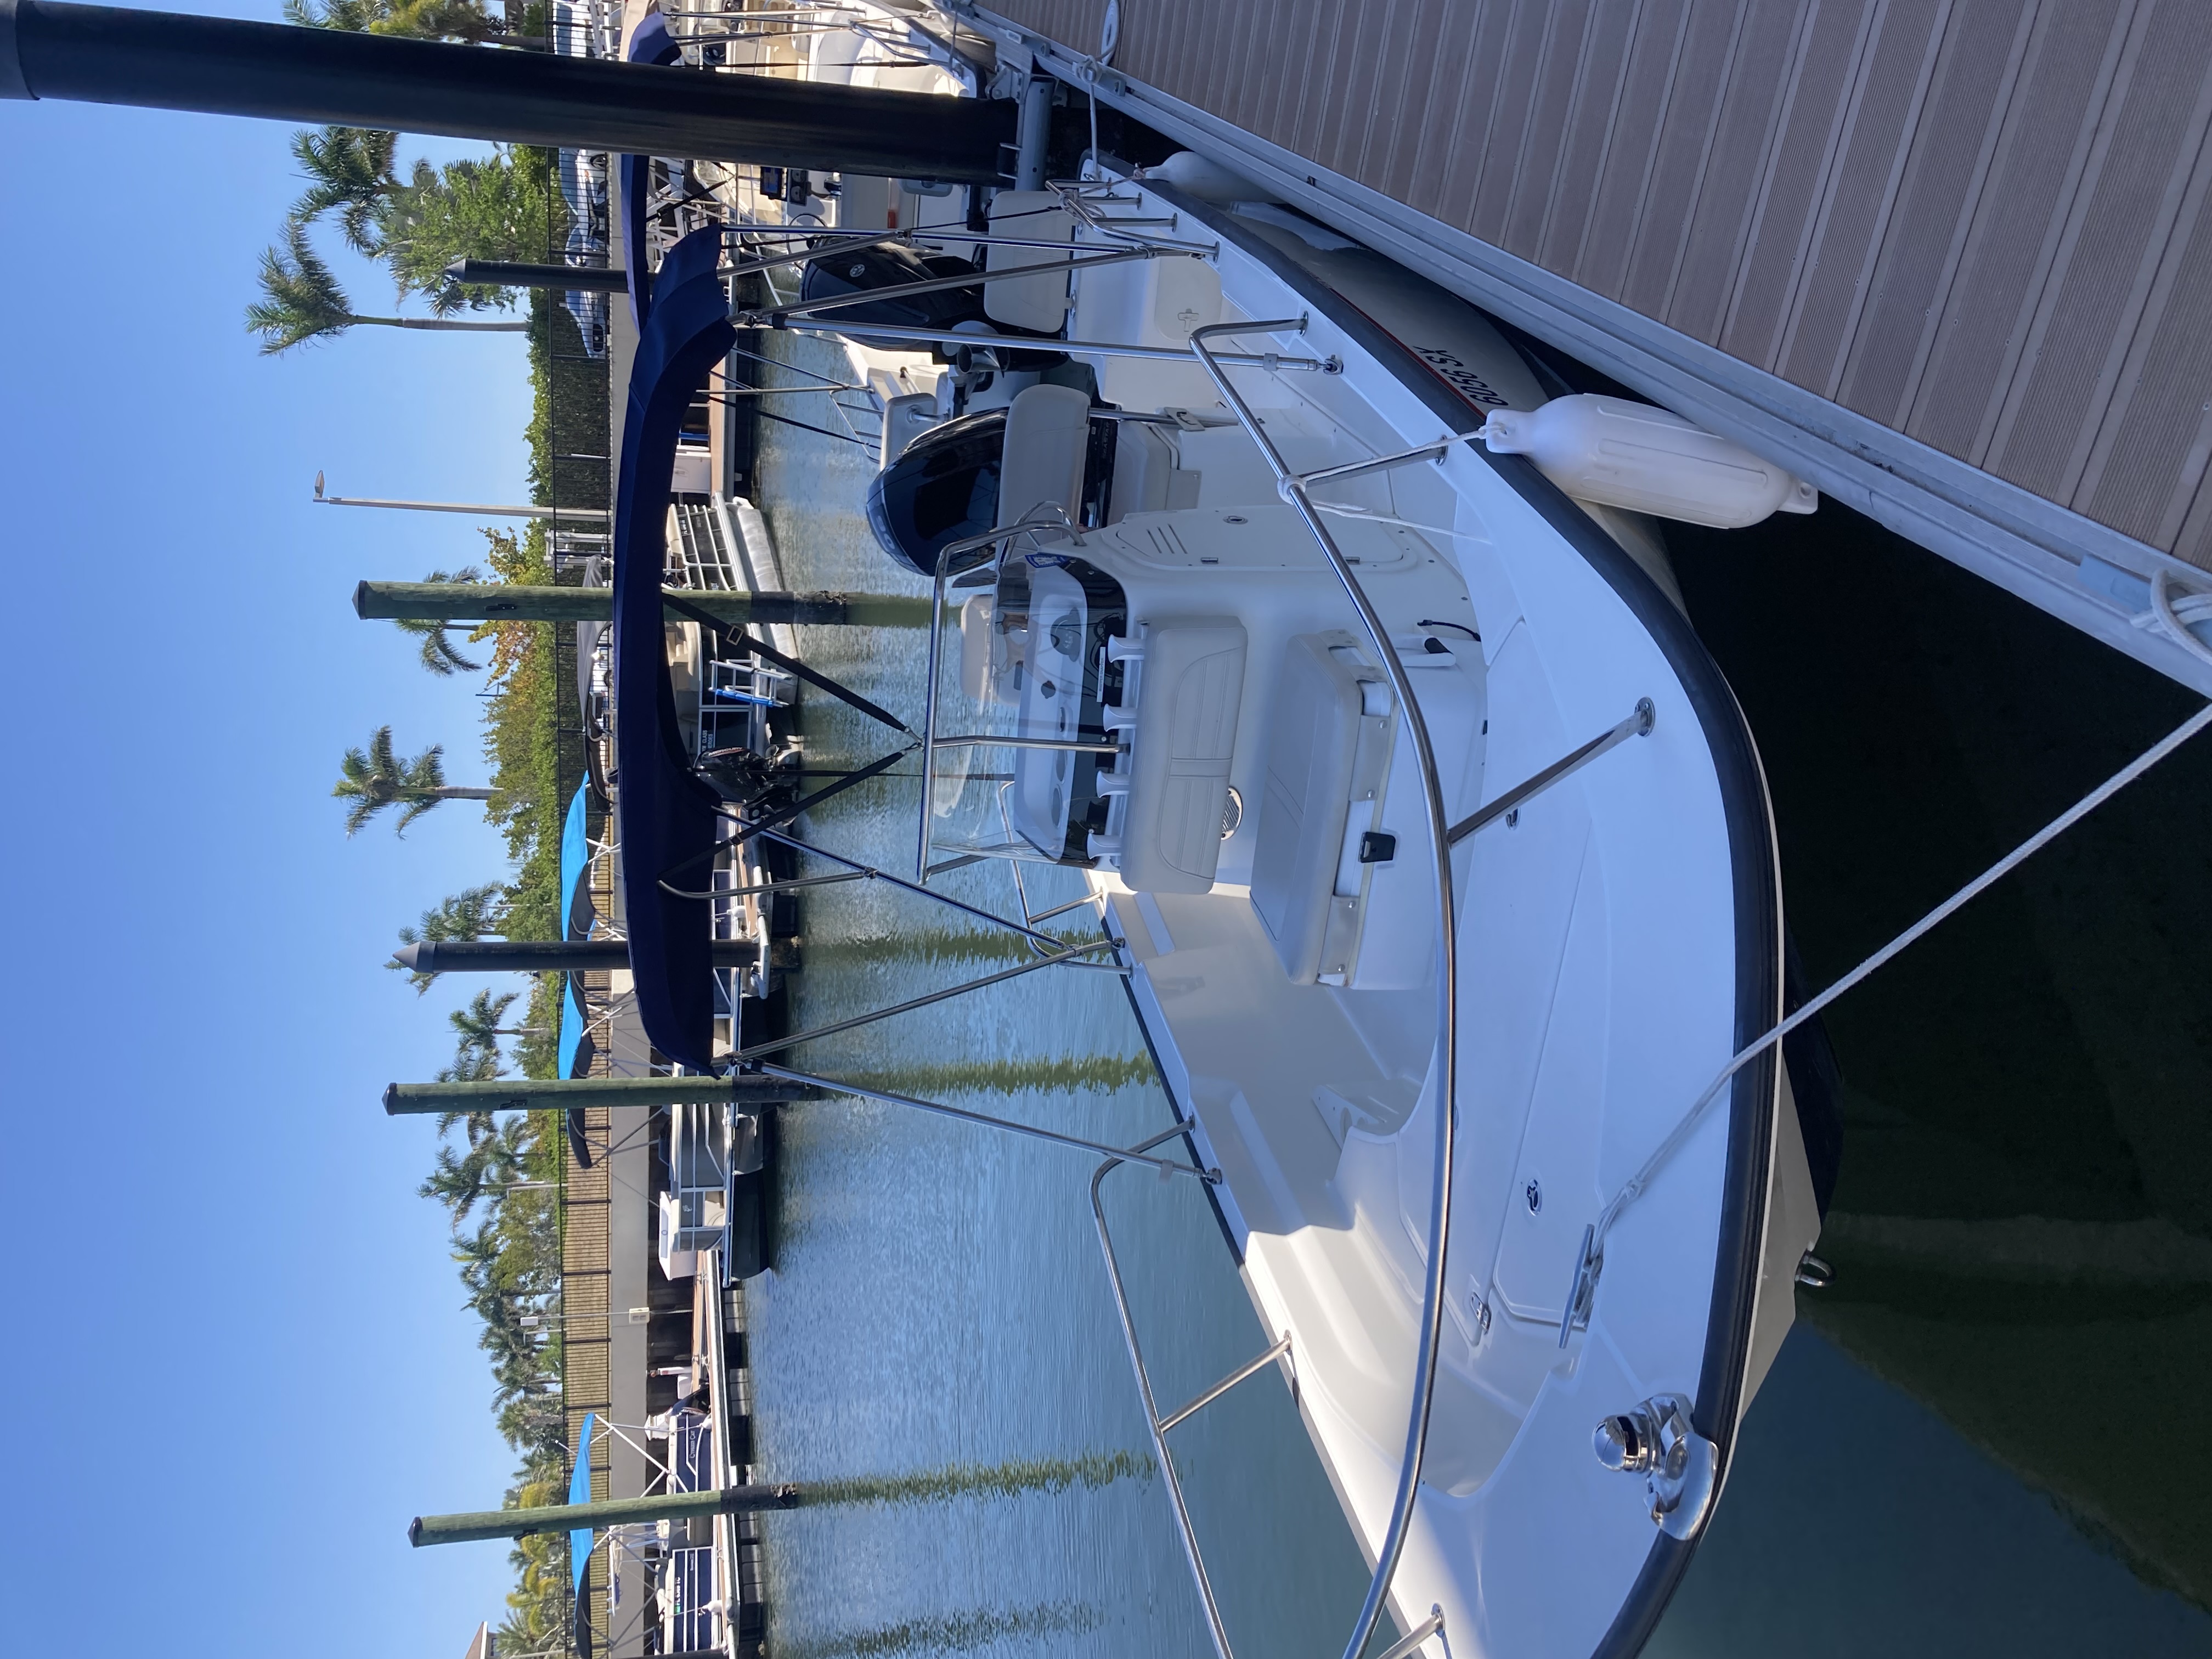 WHIPPER SNAPPPER (17' Center Console-Boston Whaler- 90 HP-Fishing)